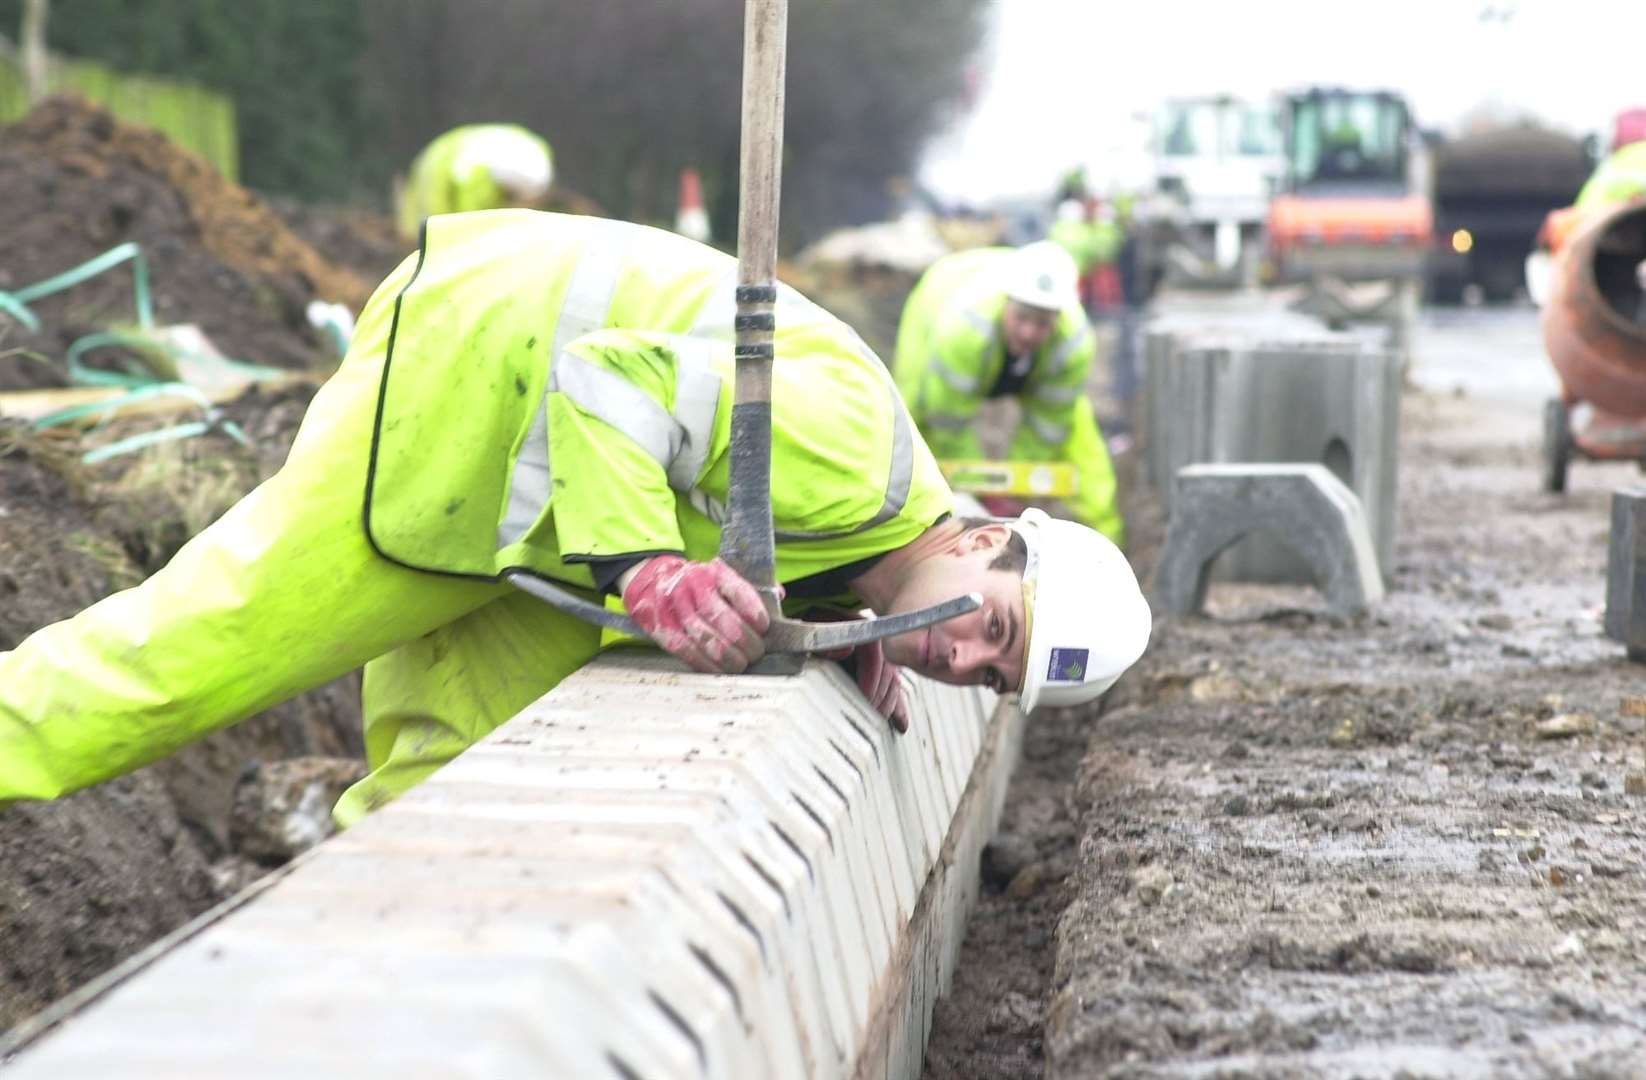 There is a £400m project to repair and renew roads over the next three years